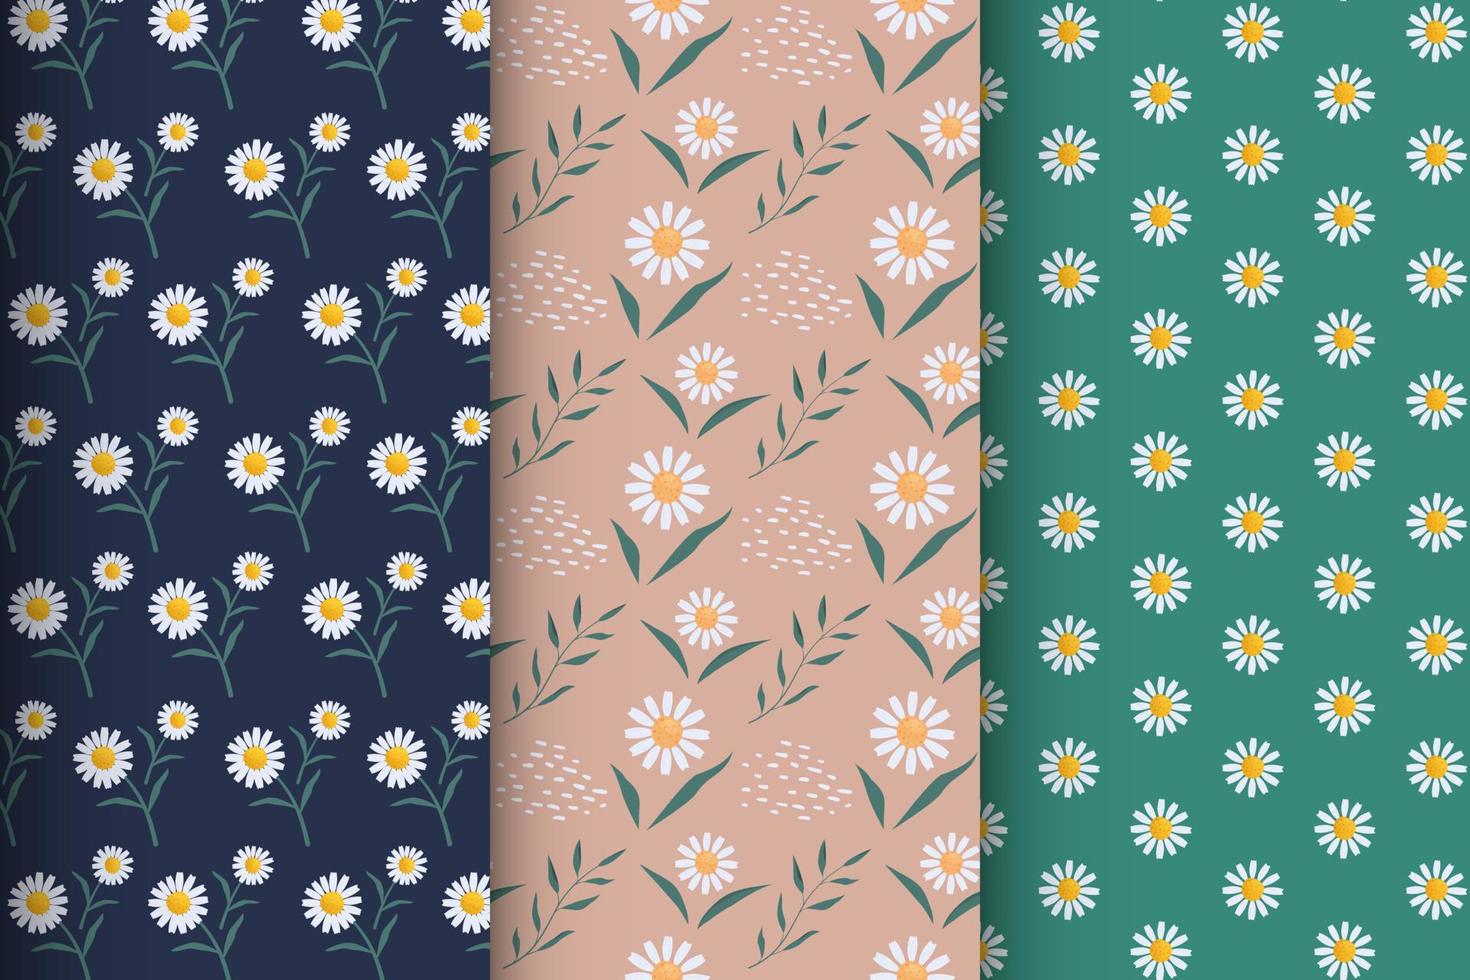 Collection of floral patterns on a dark background vector